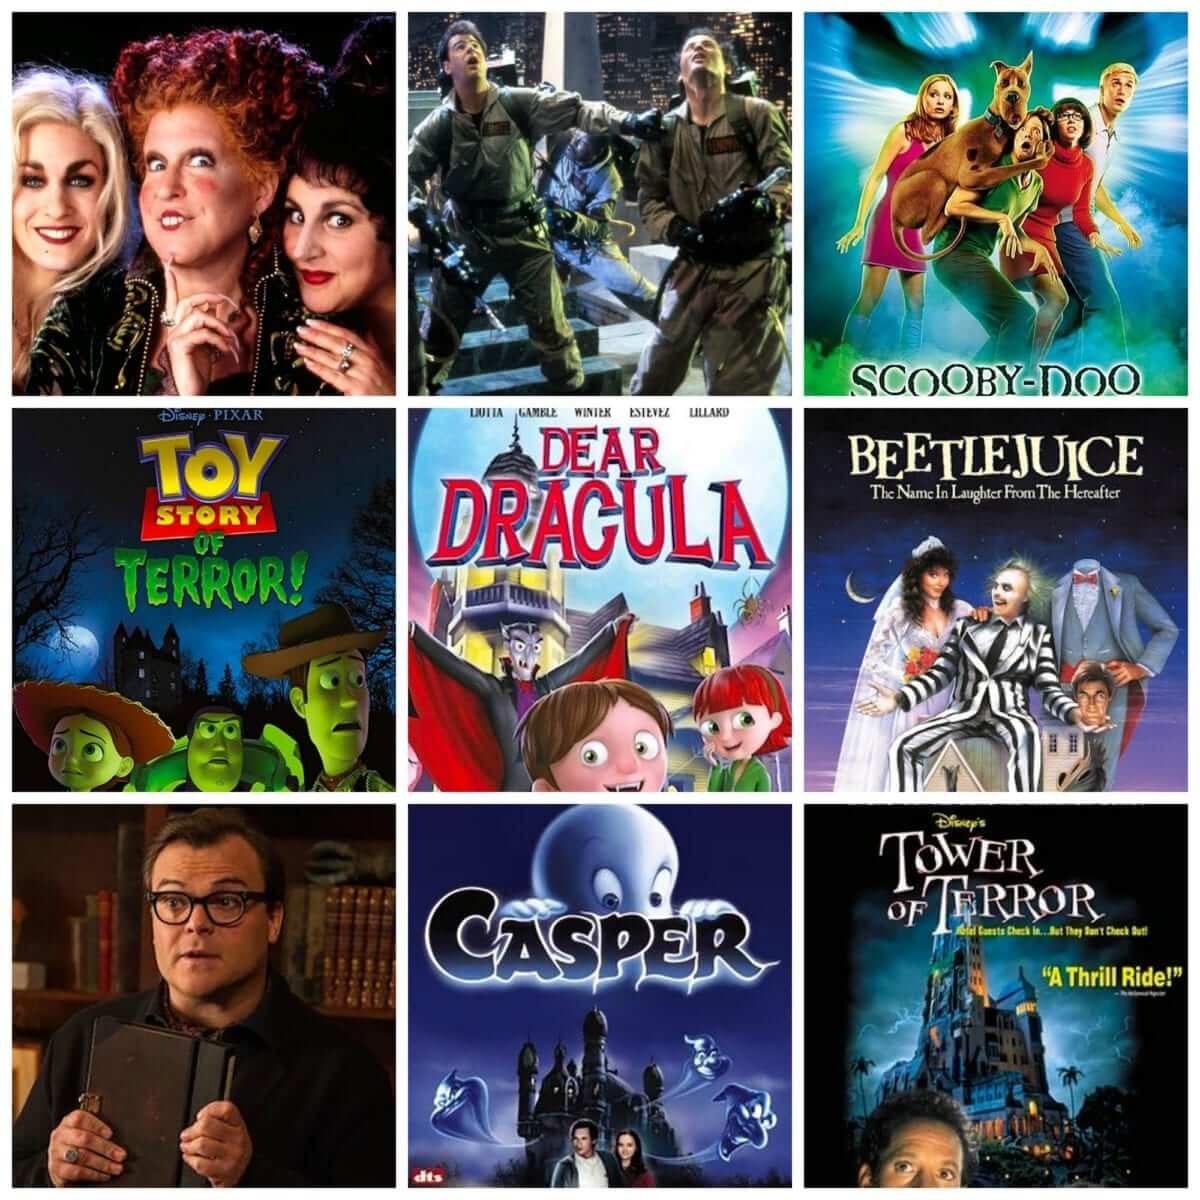 Over 45 All Time Best Halloween Movies for Kids - Lou Lou Girls